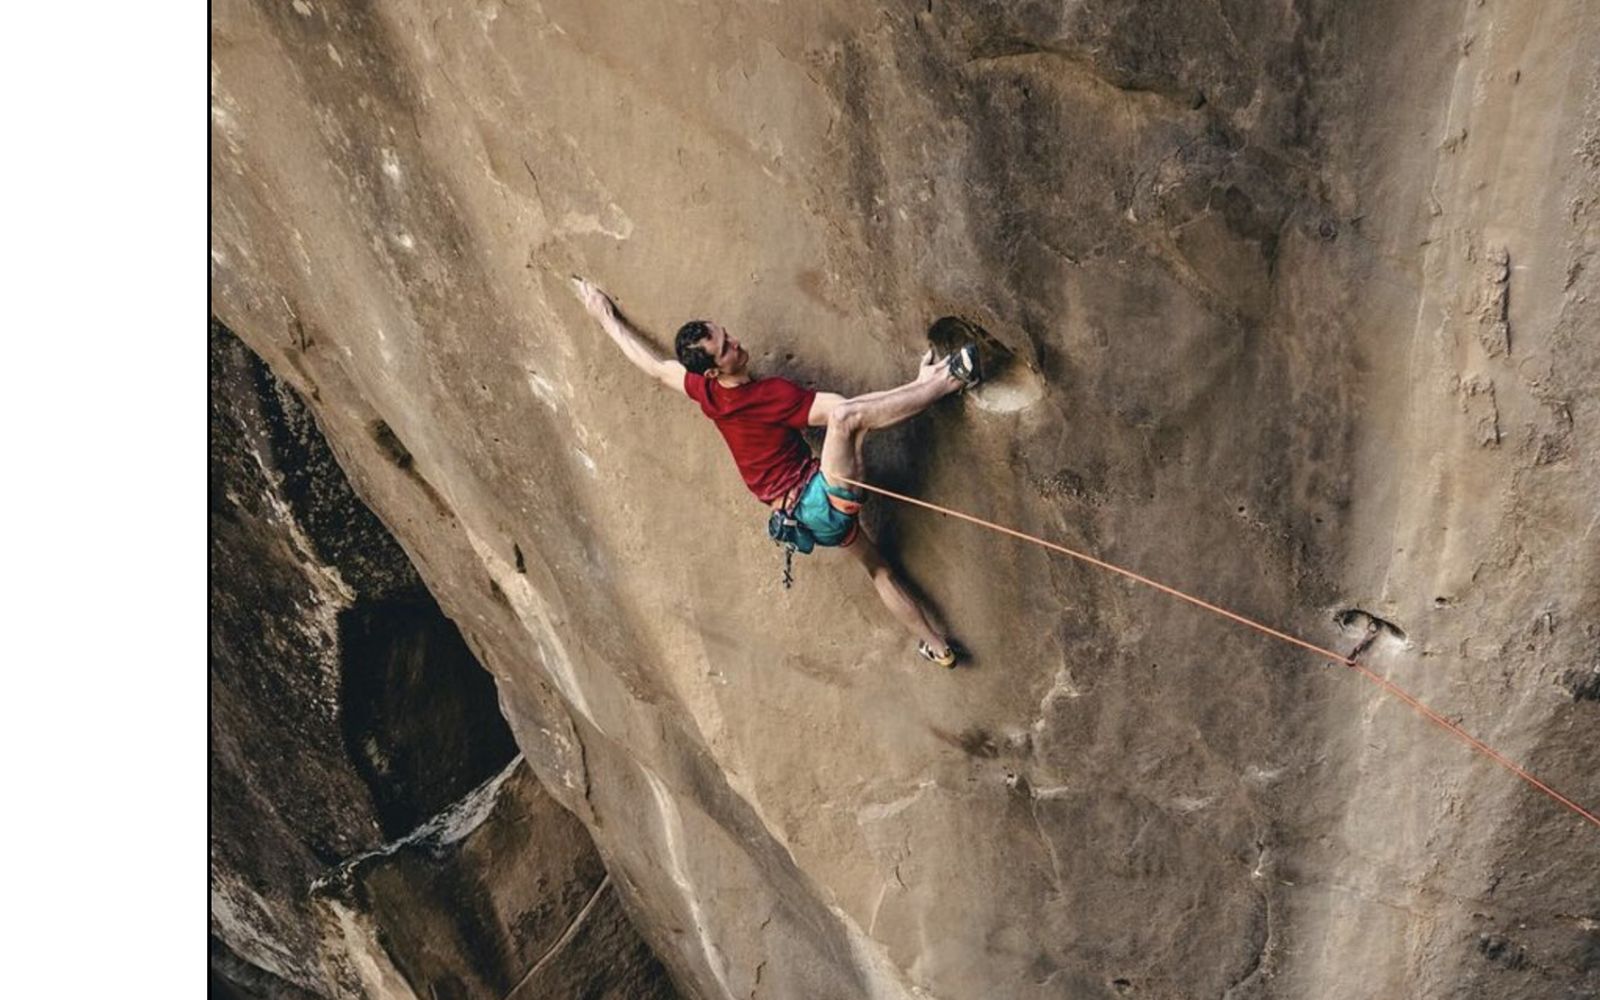 Climber on crazy hard trad route